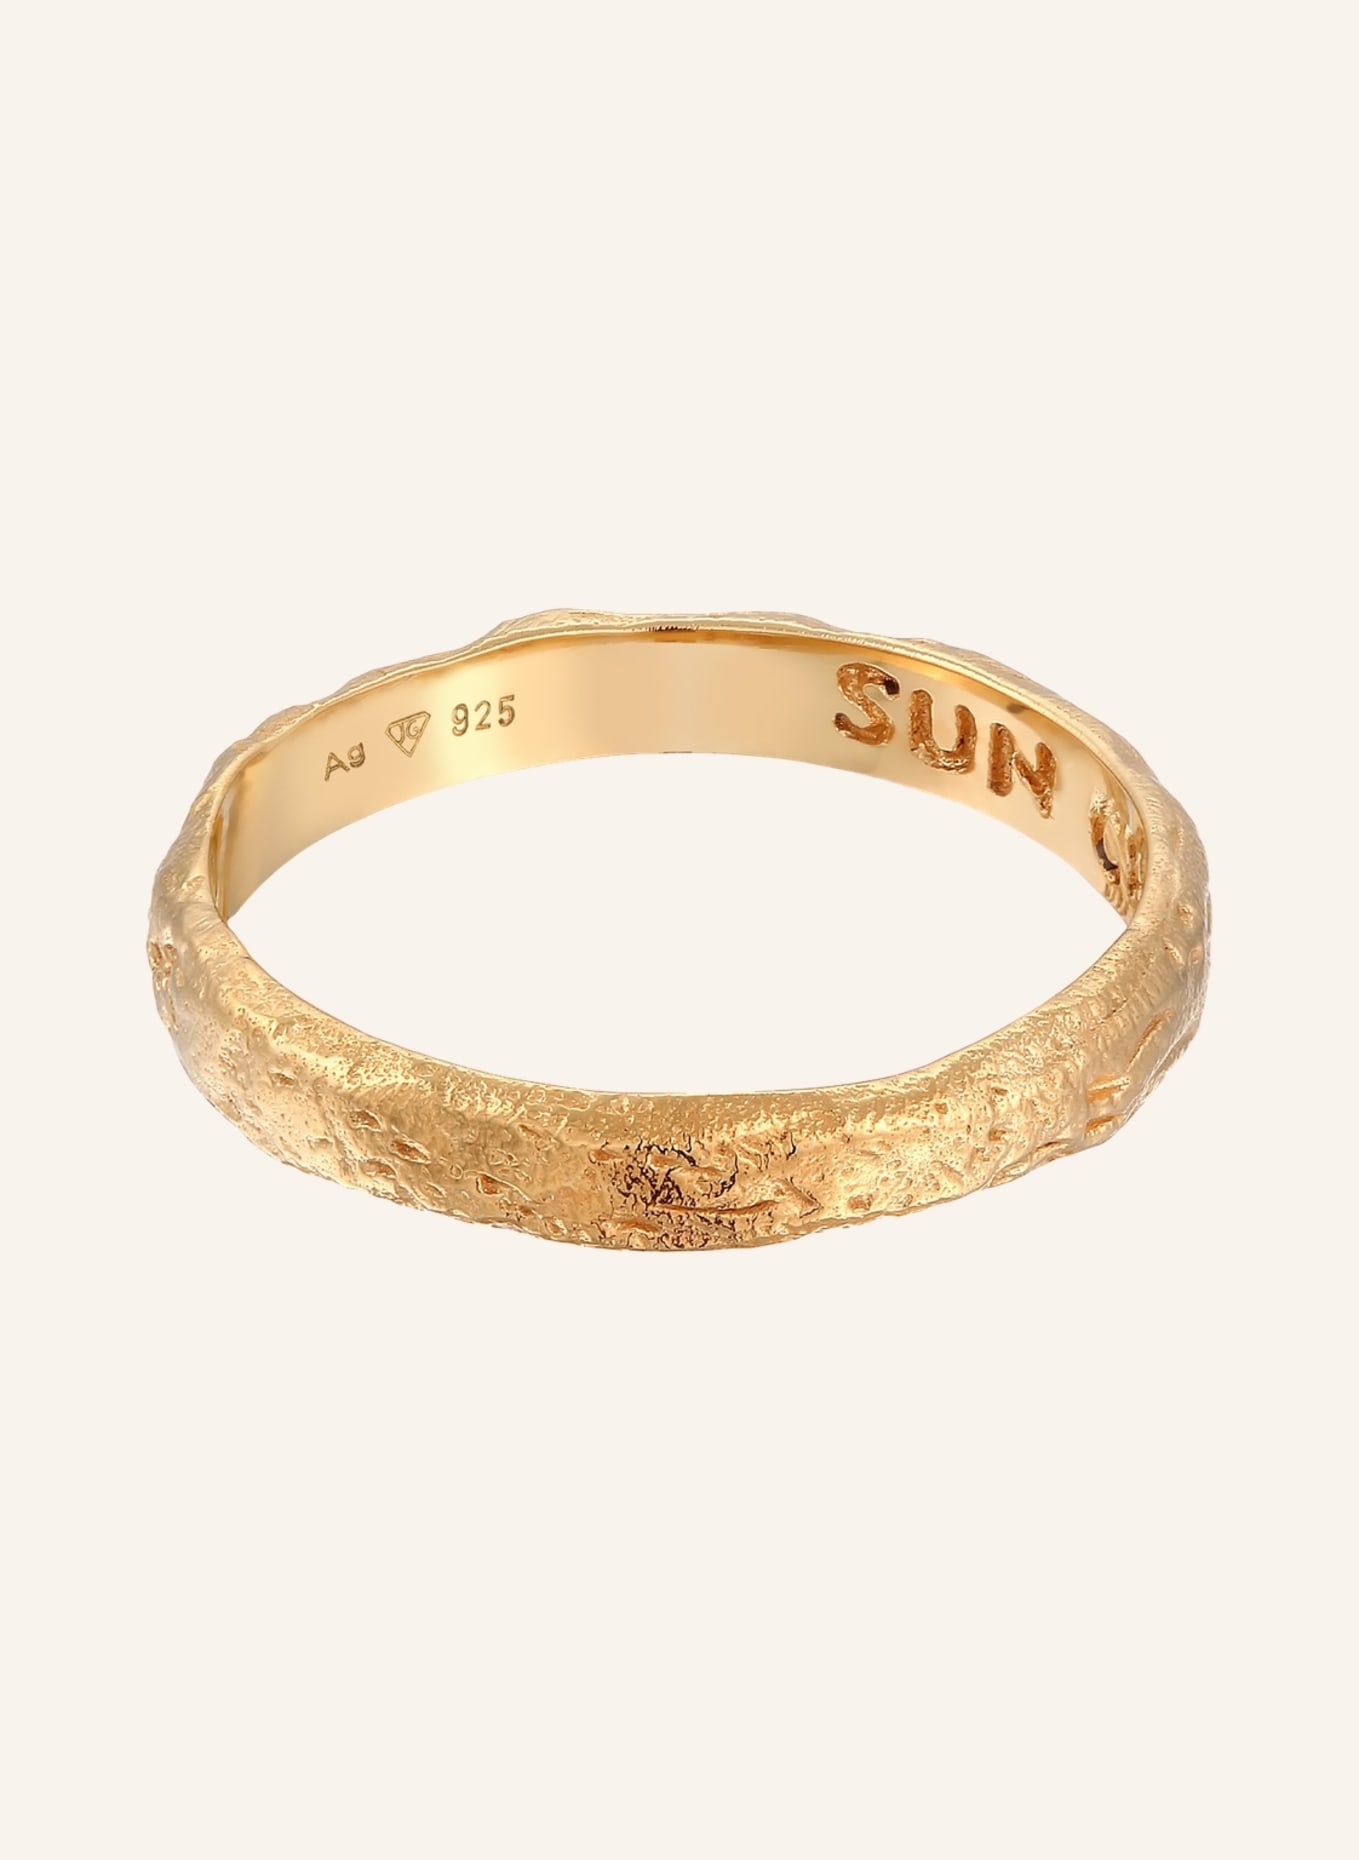 HAZE & Ring gold GLORY in